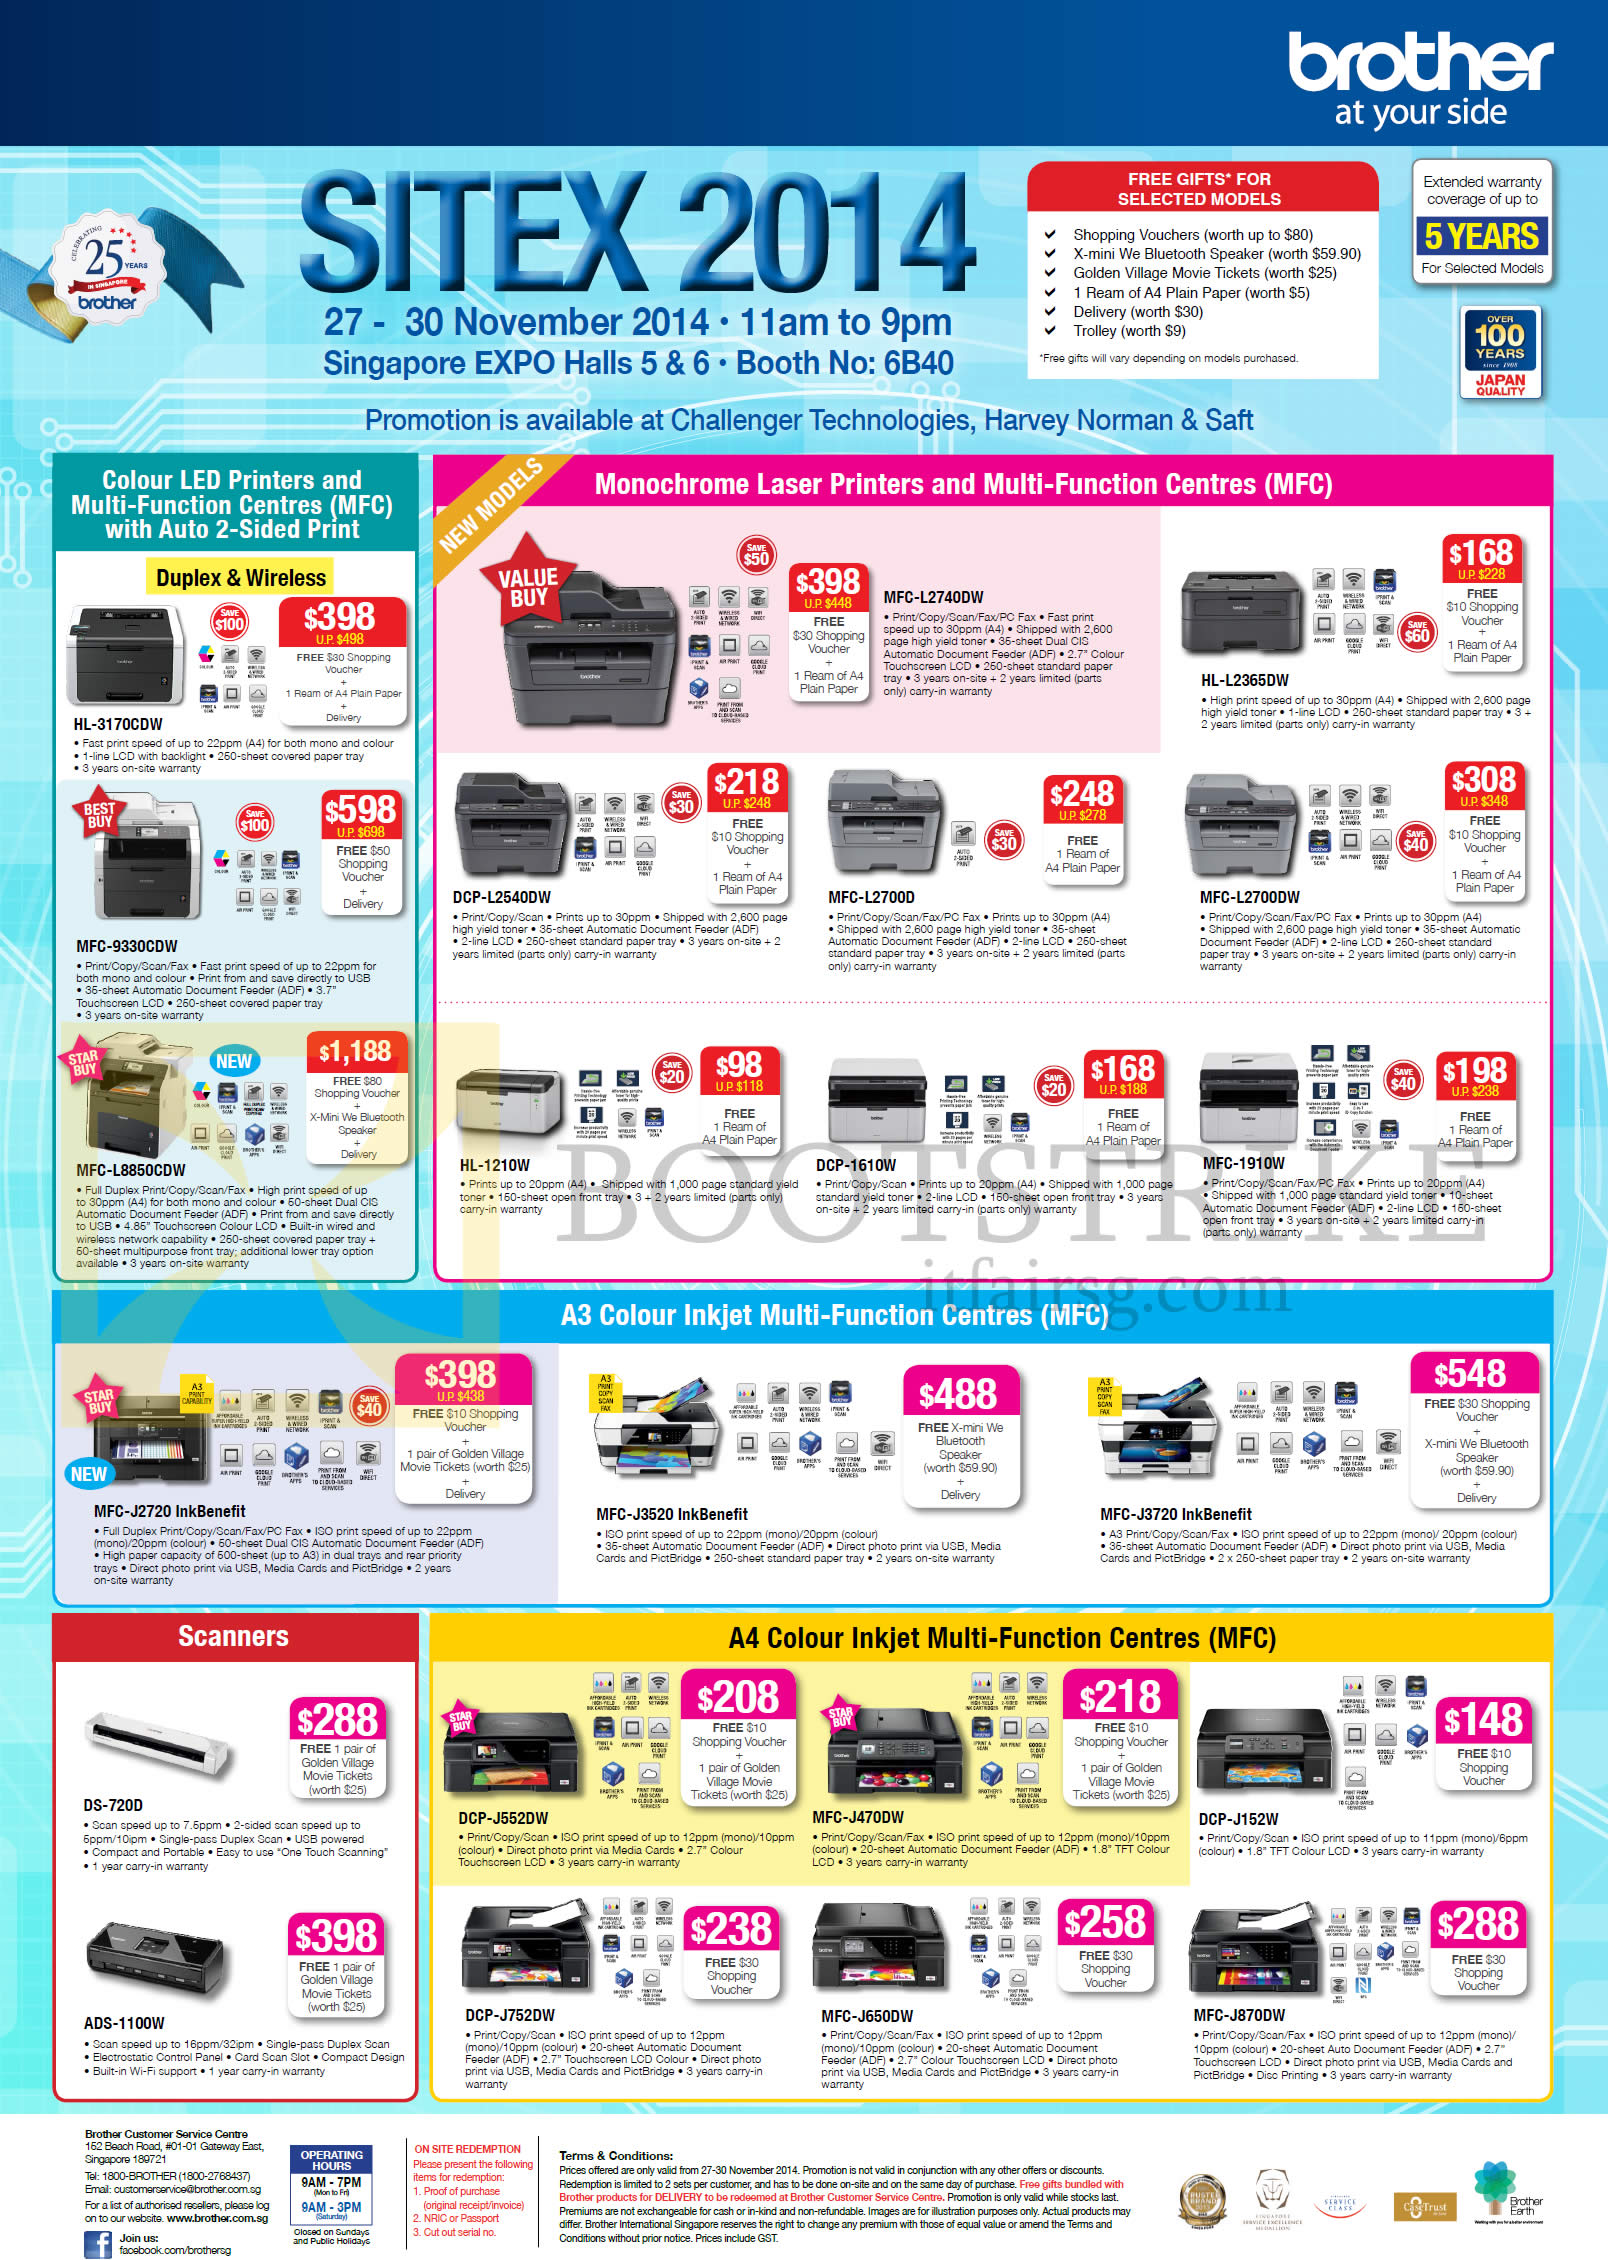 SITEX 2014 price list image brochure of Brother Printers, Scanners, HL-3170CDW, MFC-9330CDW, L8850CDW, L2740DW, DCP-L2540DW, DS-720D, ADS-1100W, DCP-J552DW, J152W, J752DW, MFC-J870DW